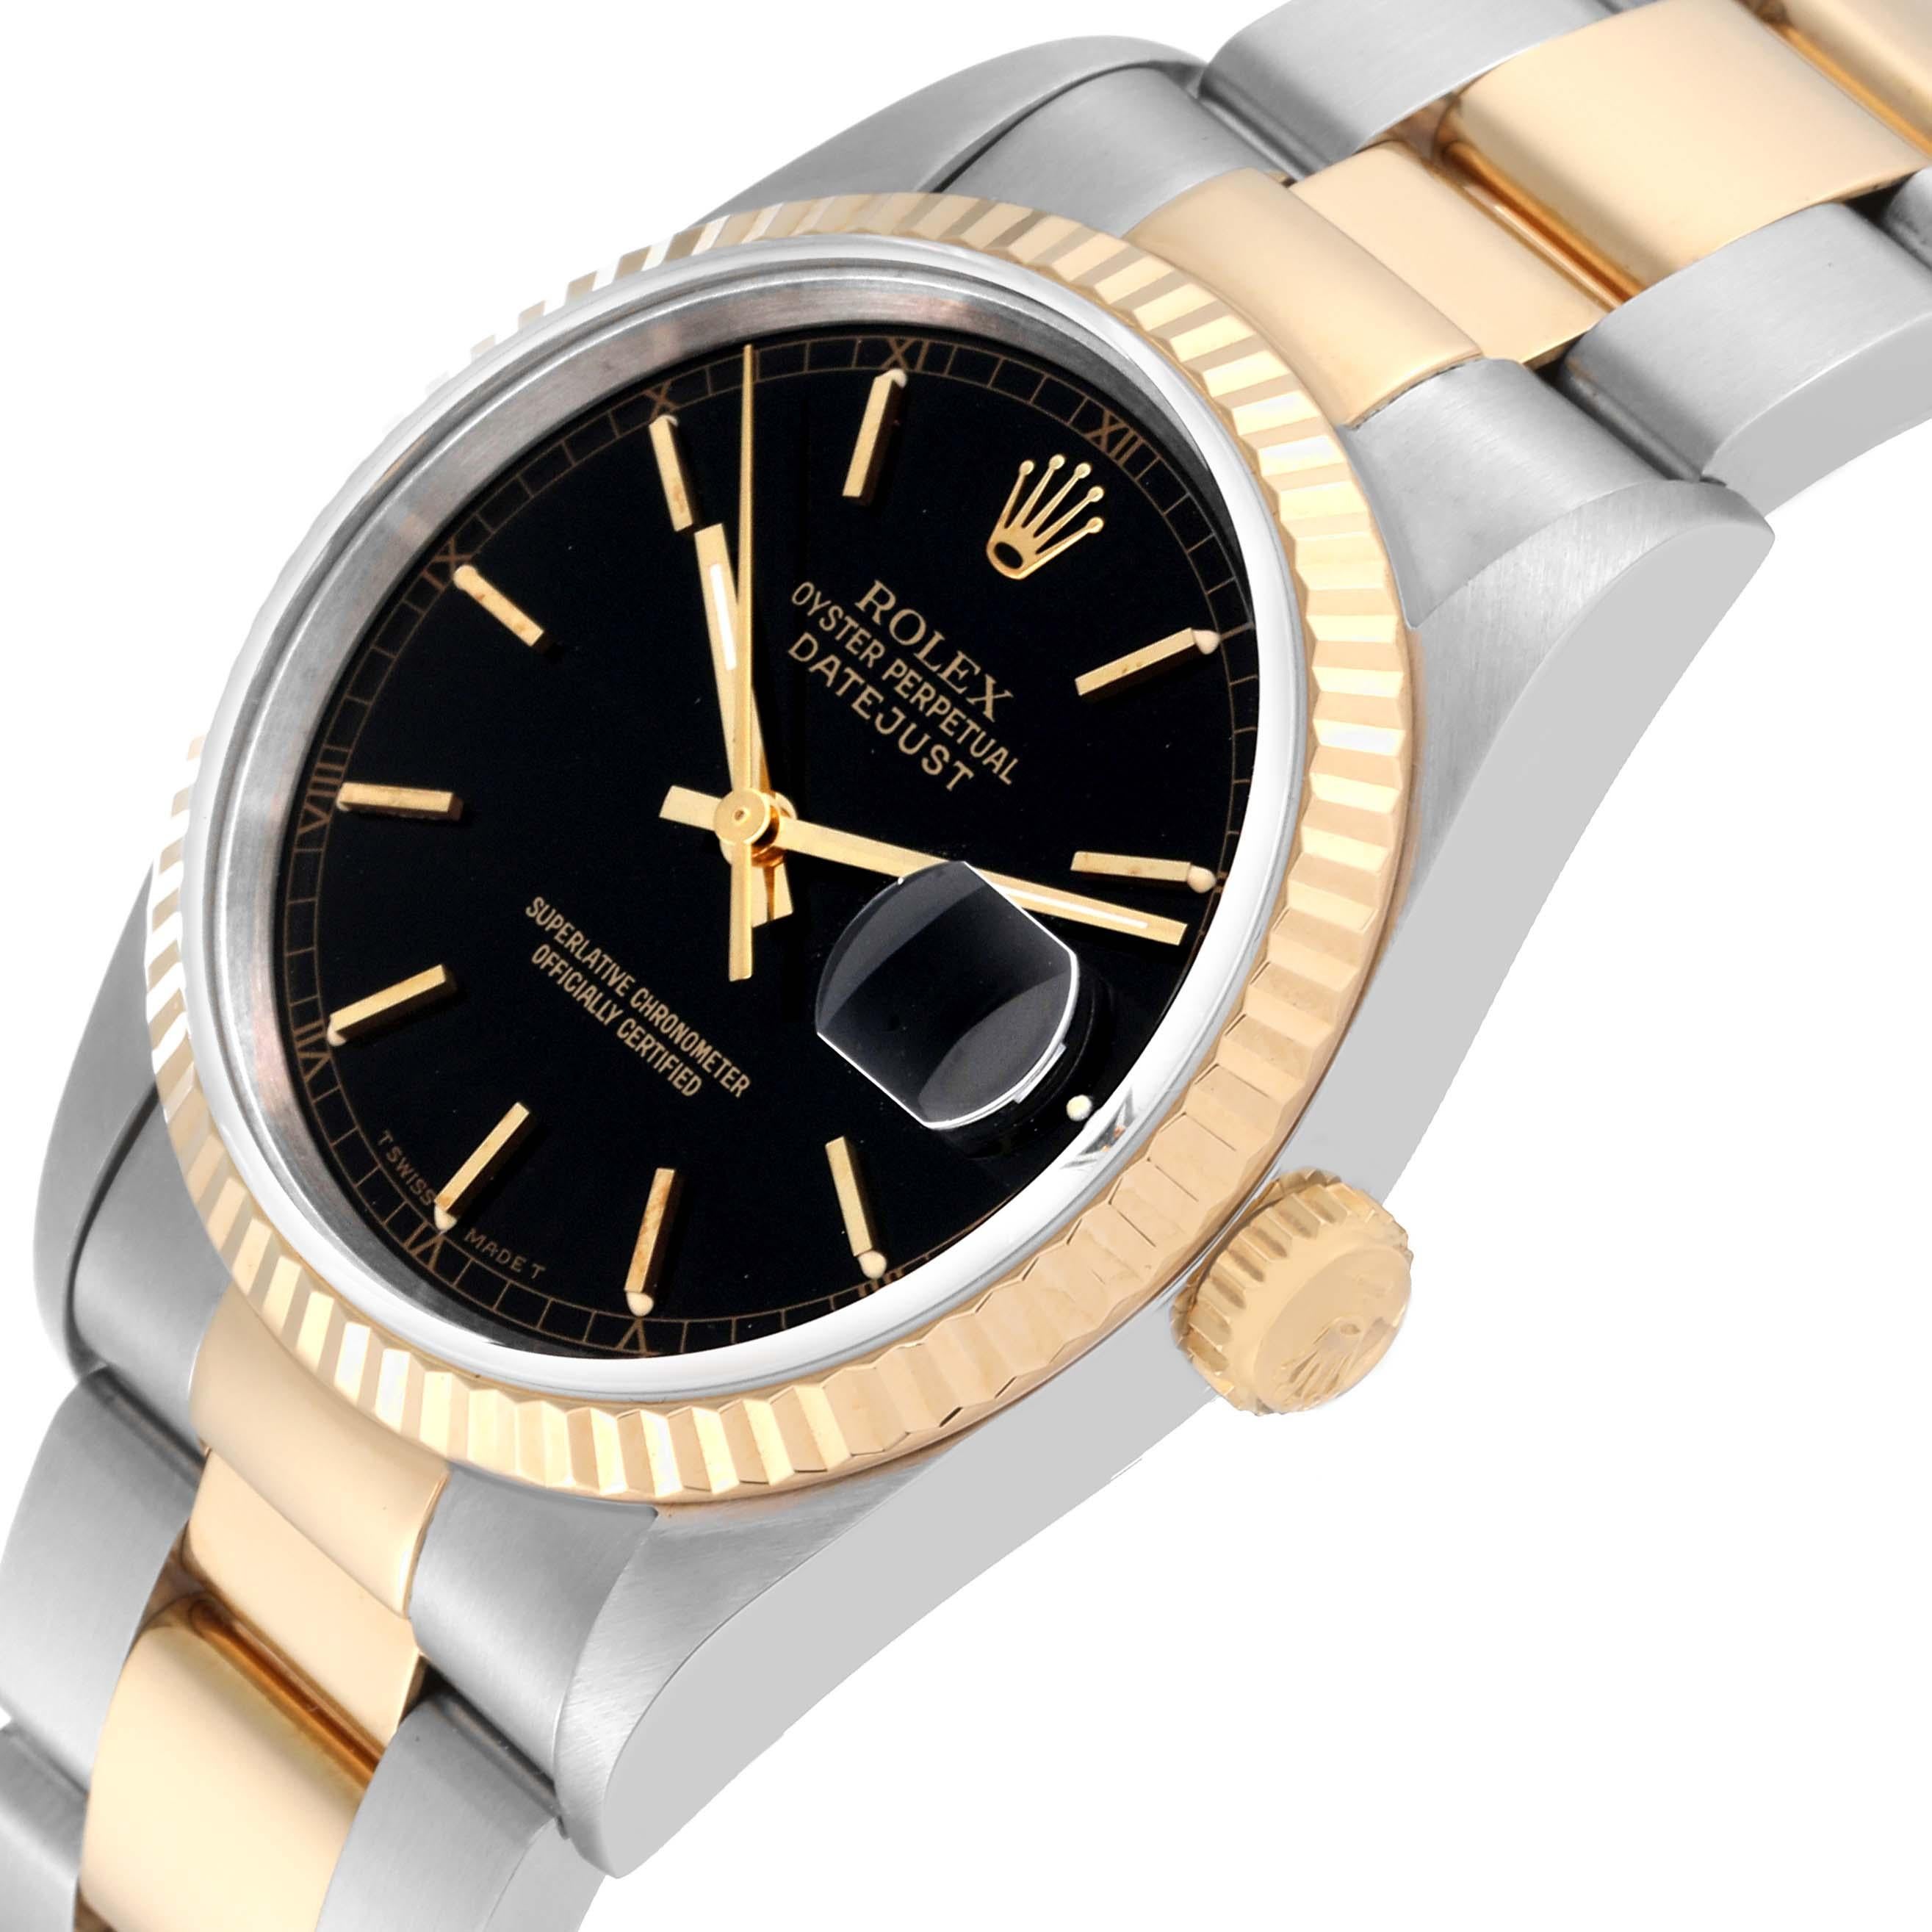 Rolex Datejust 36 Steel Yellow Gold Black Dial Mens Watch 16233 In Excellent Condition For Sale In Atlanta, GA